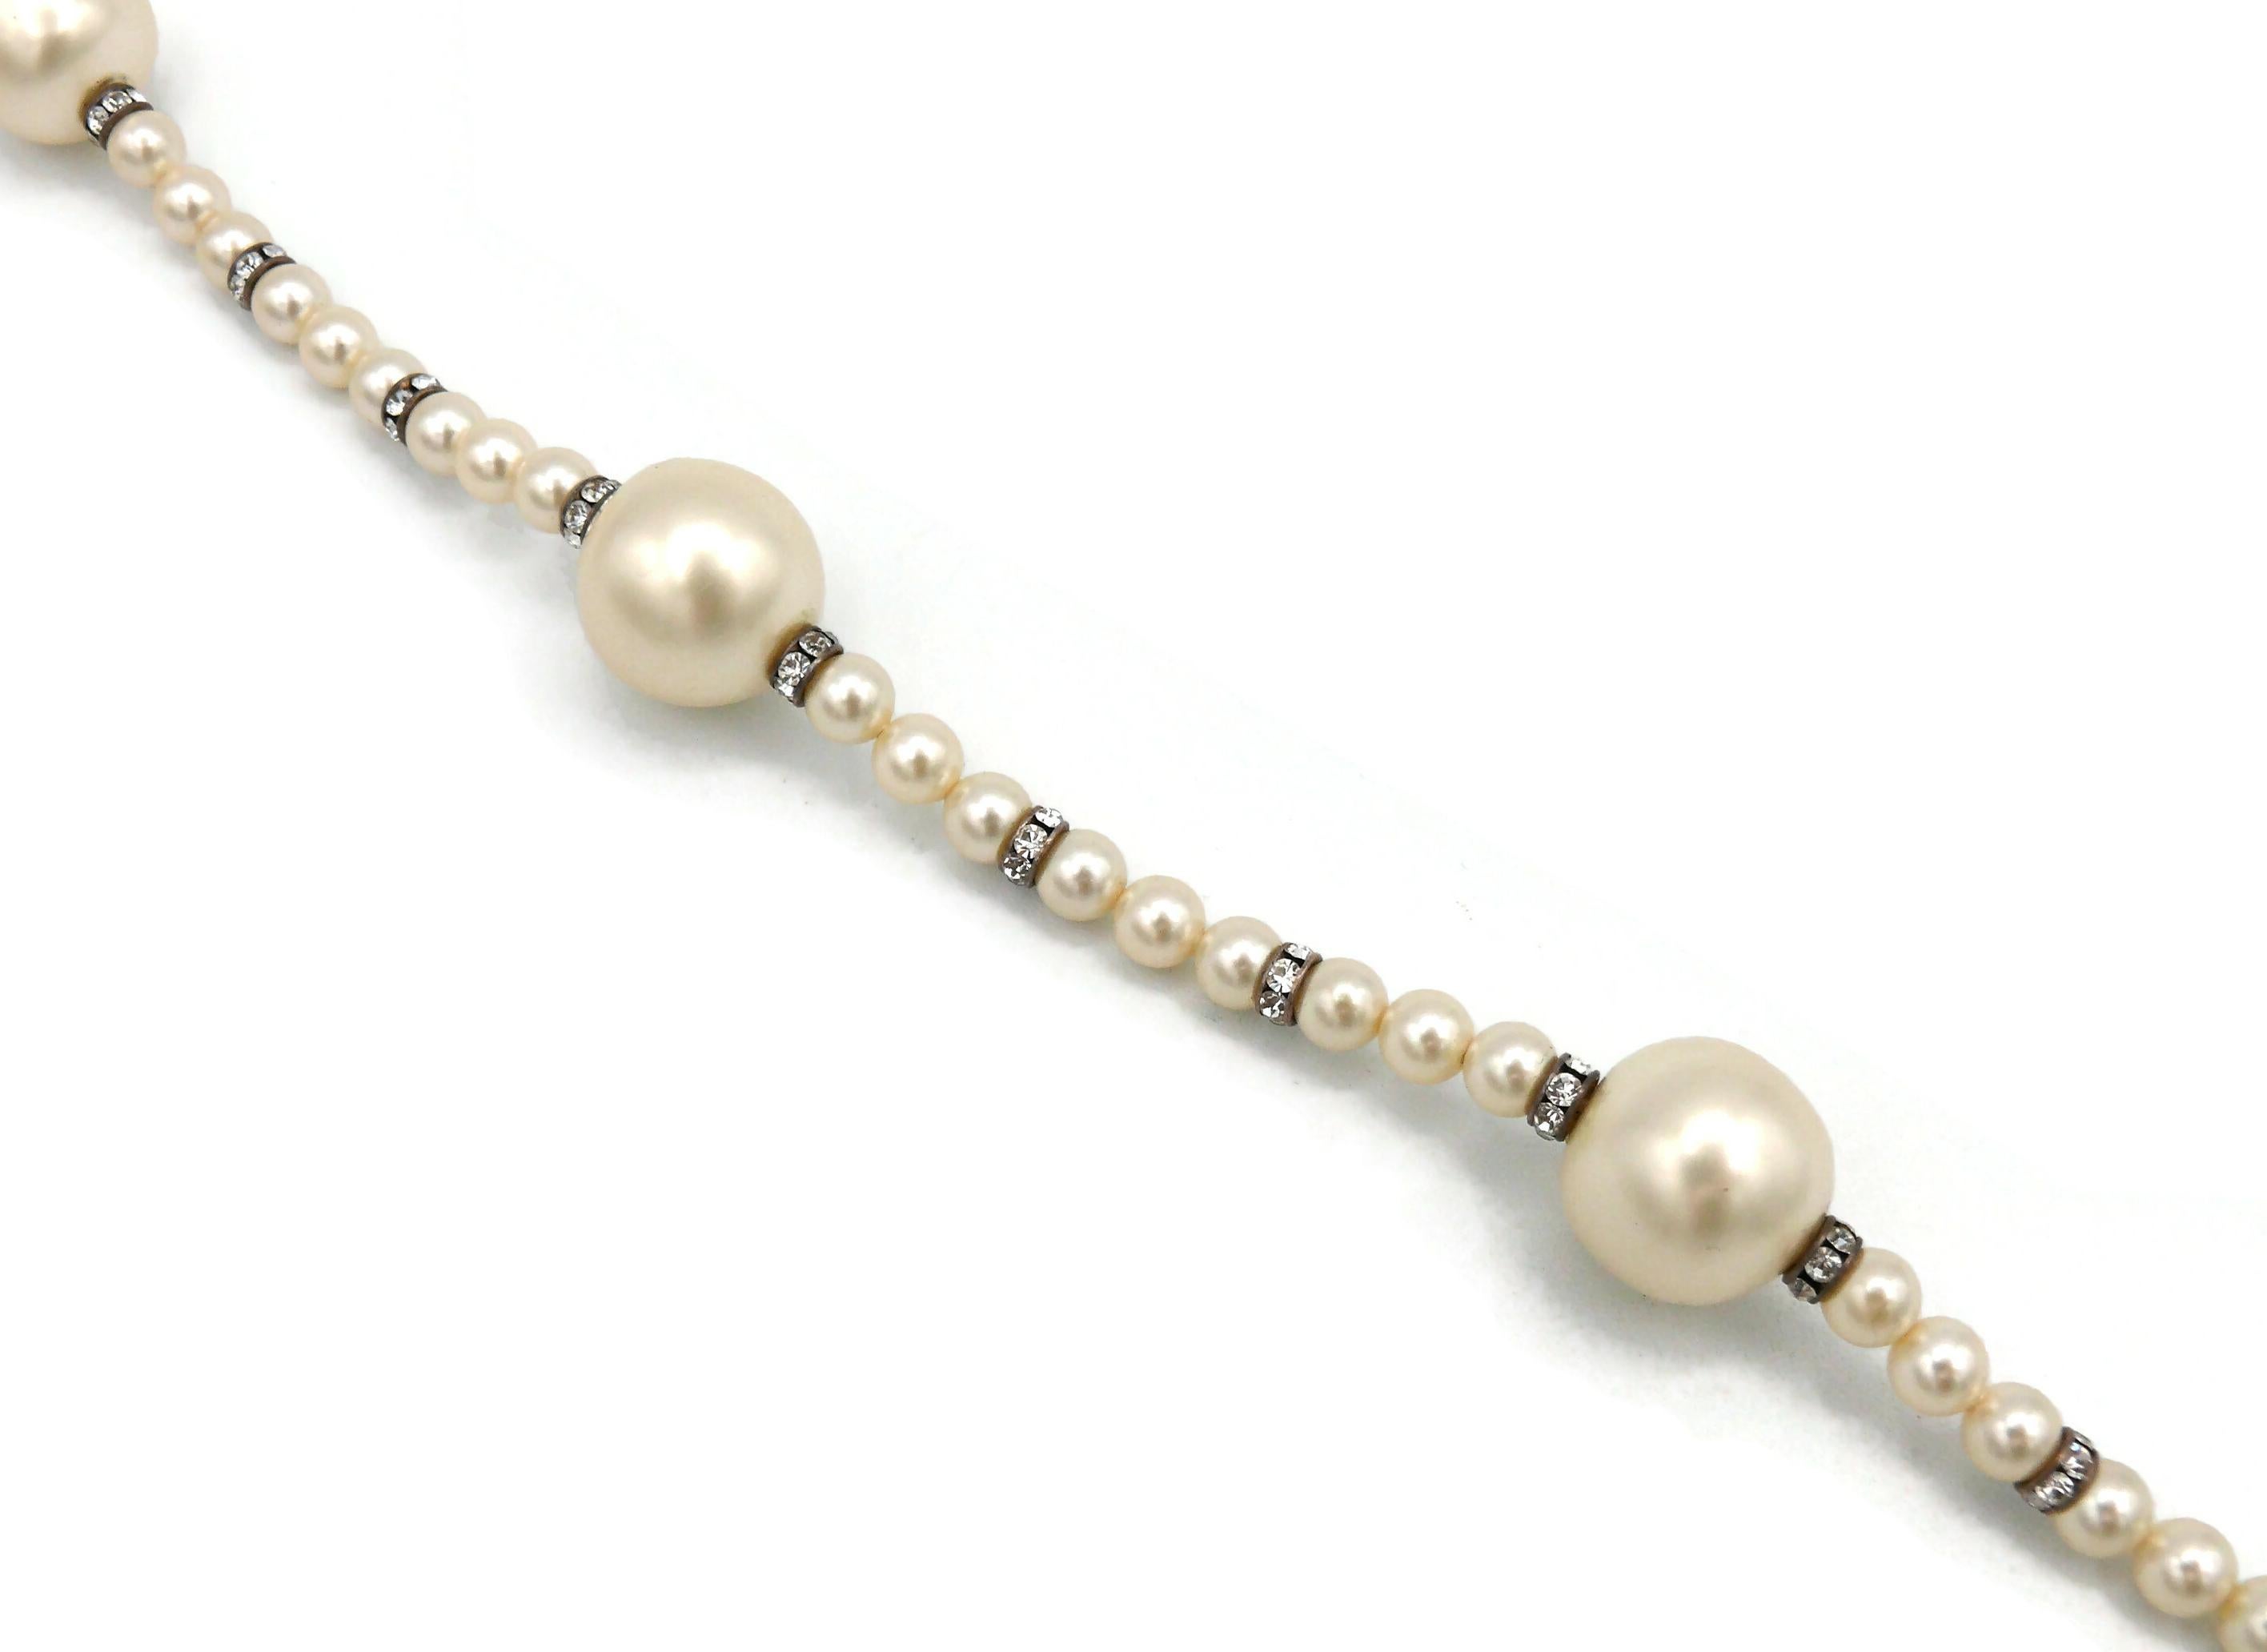 CHANEL by KARL LAGERFELD Vintage Faux Pearl and Crystal Necklace, Fall 1993 For Sale 6